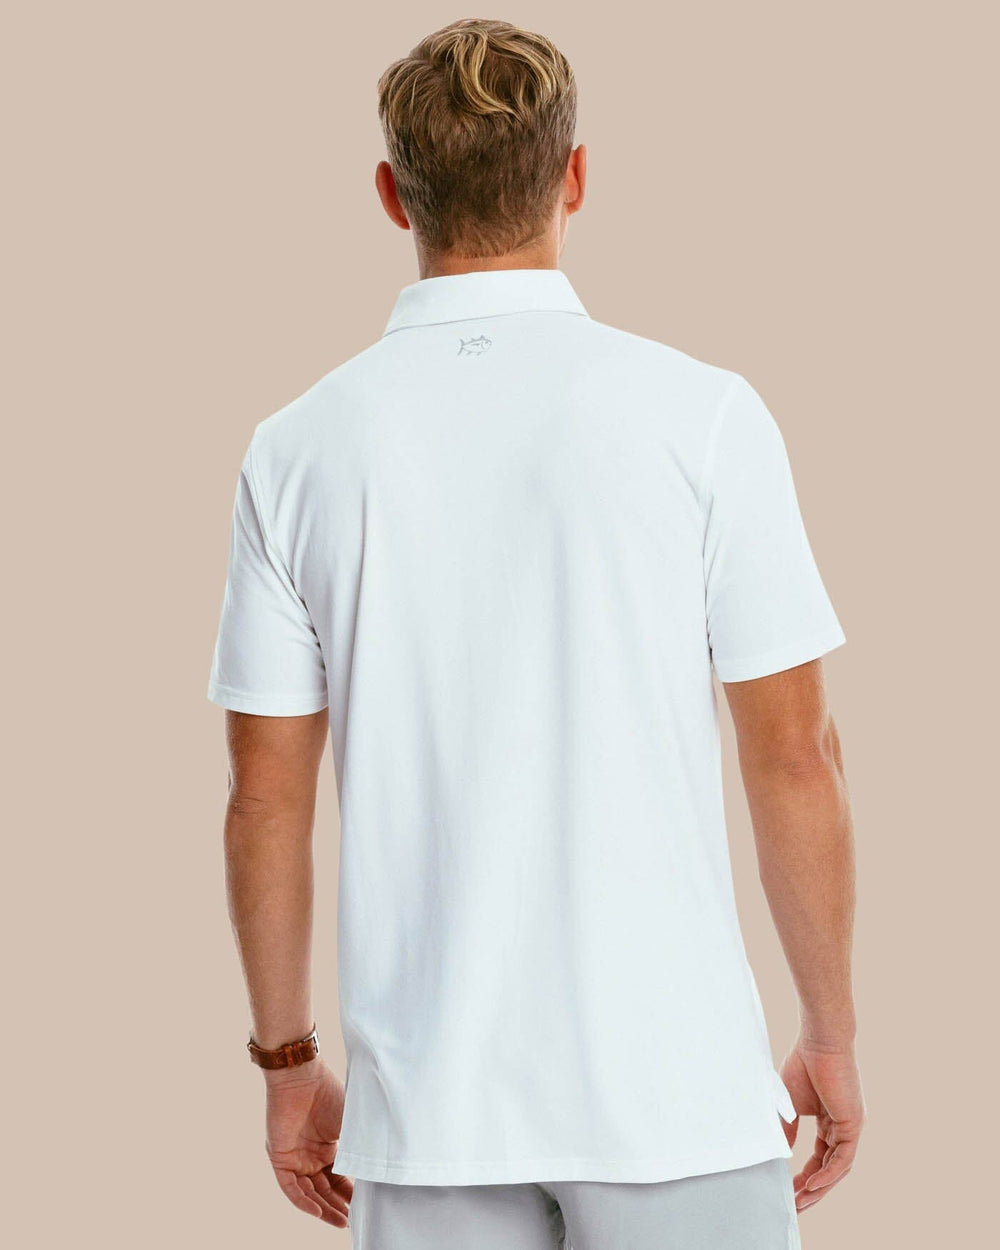 The back of the Men's Ryder Performance Polo Shirt by Southern Tide - Classic White